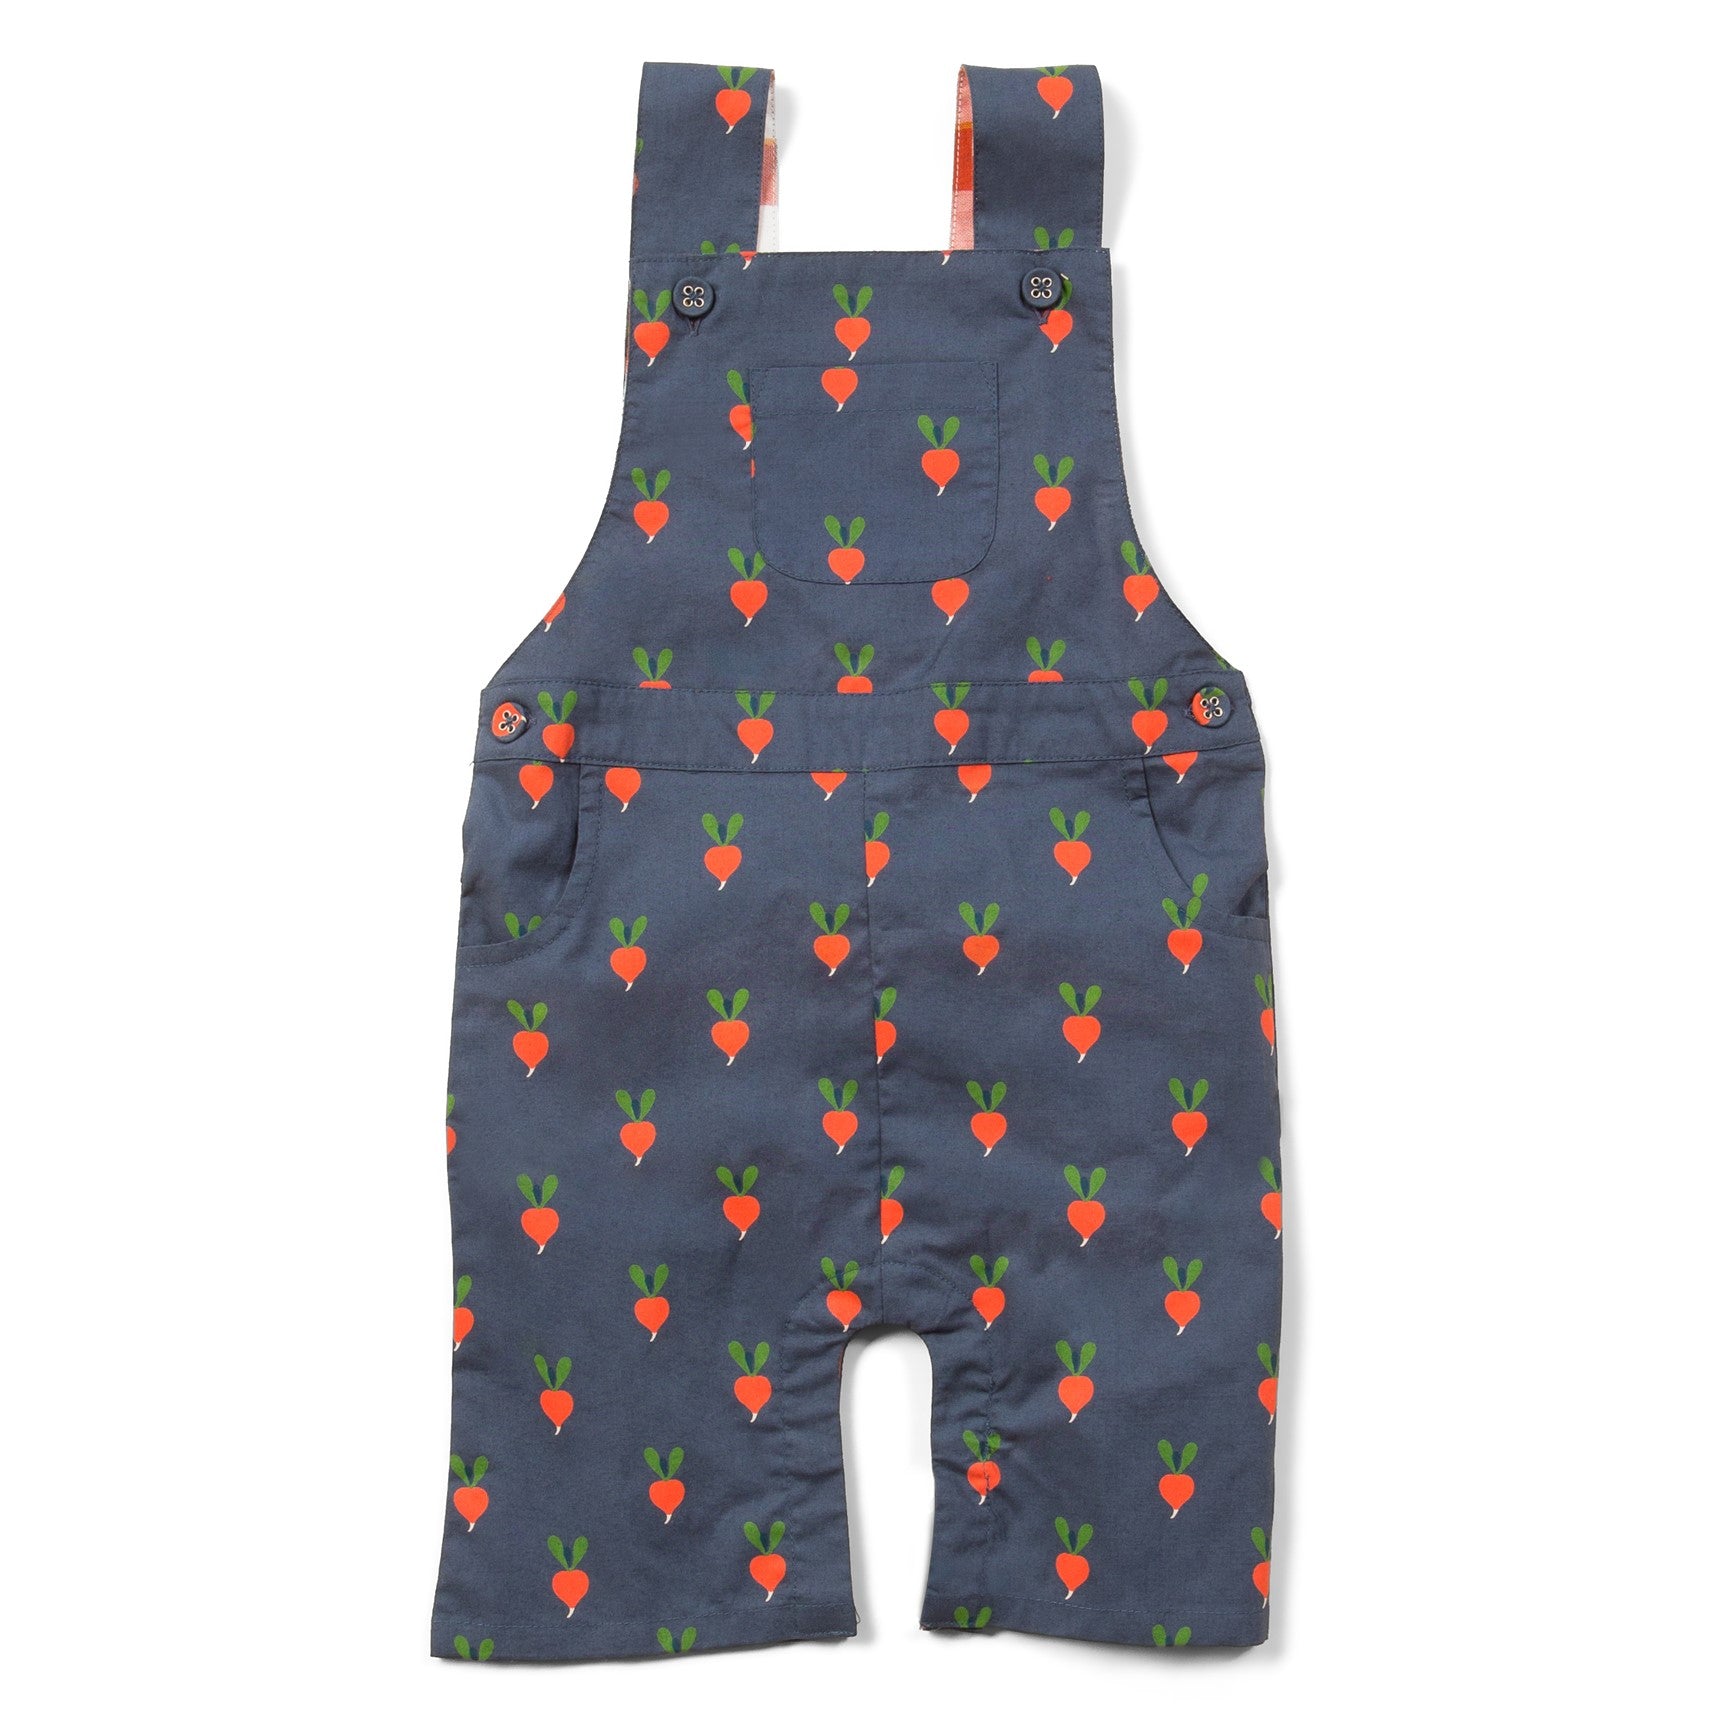 radical radish dungarees by little green radicals at whippersnappers online